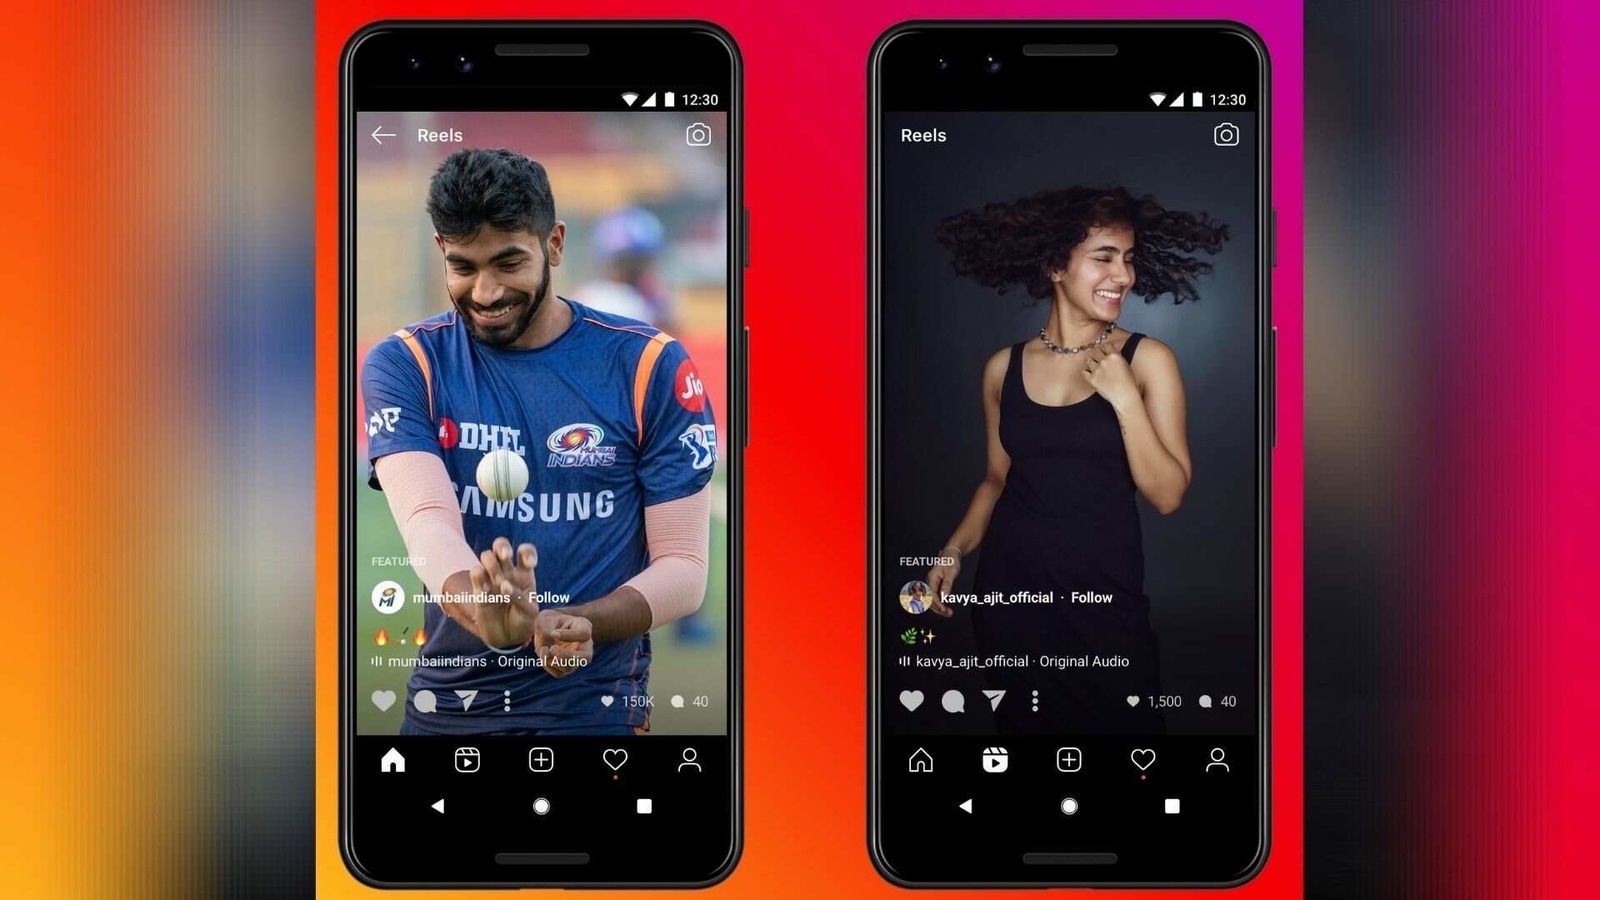 Instagram rolls out a dedicated tab for Reels in India | Tech News